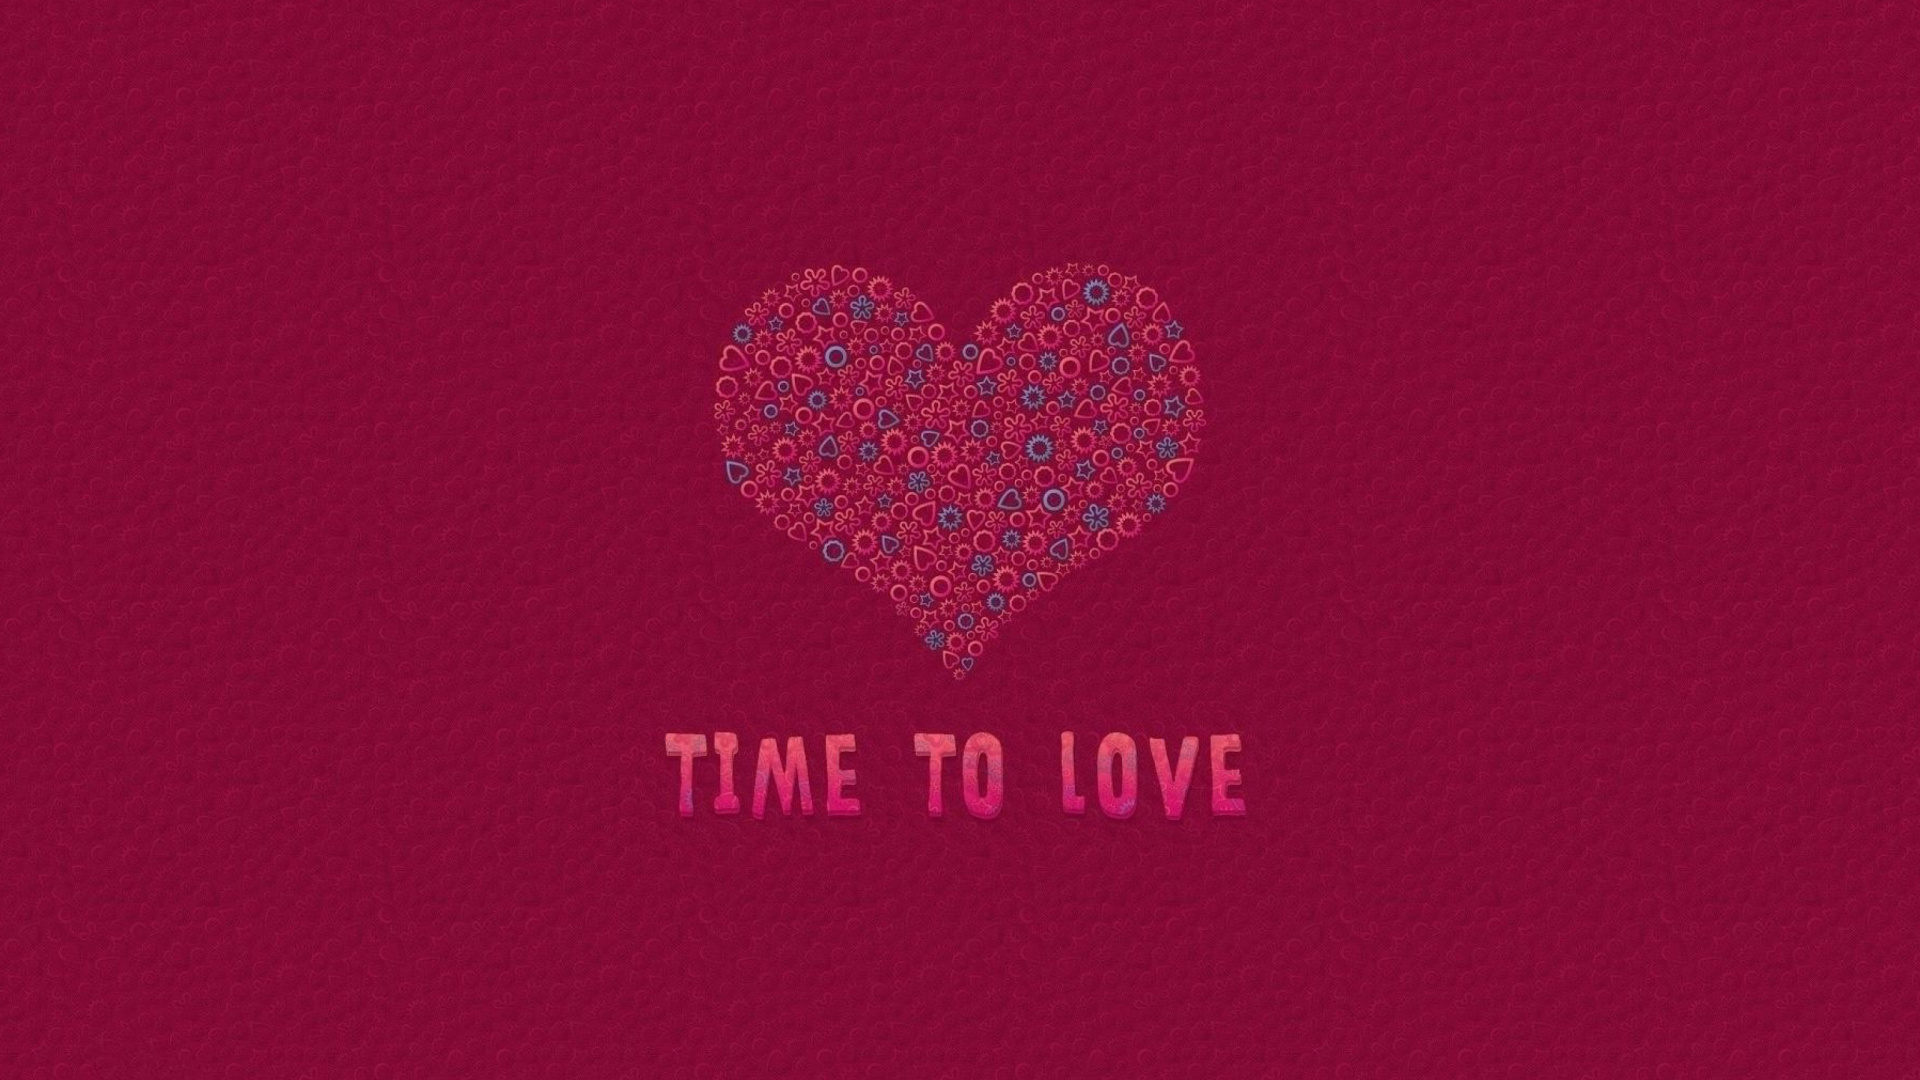 Time to Love wallpaper 1920x1080